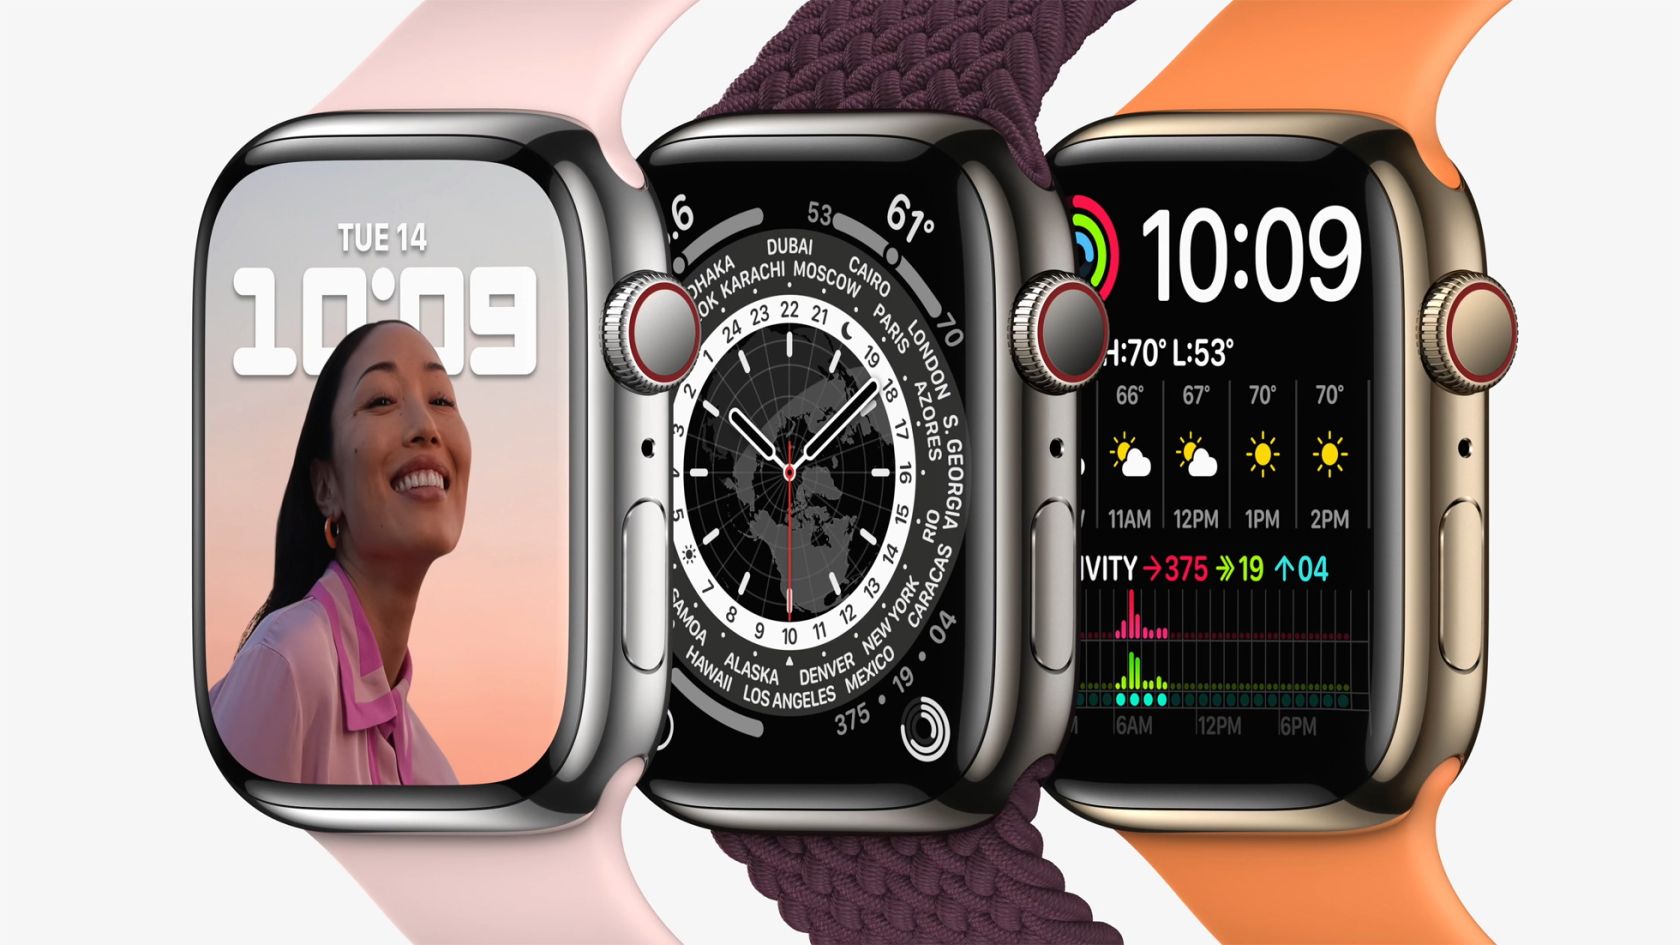 Apple Watch Series 7 official image